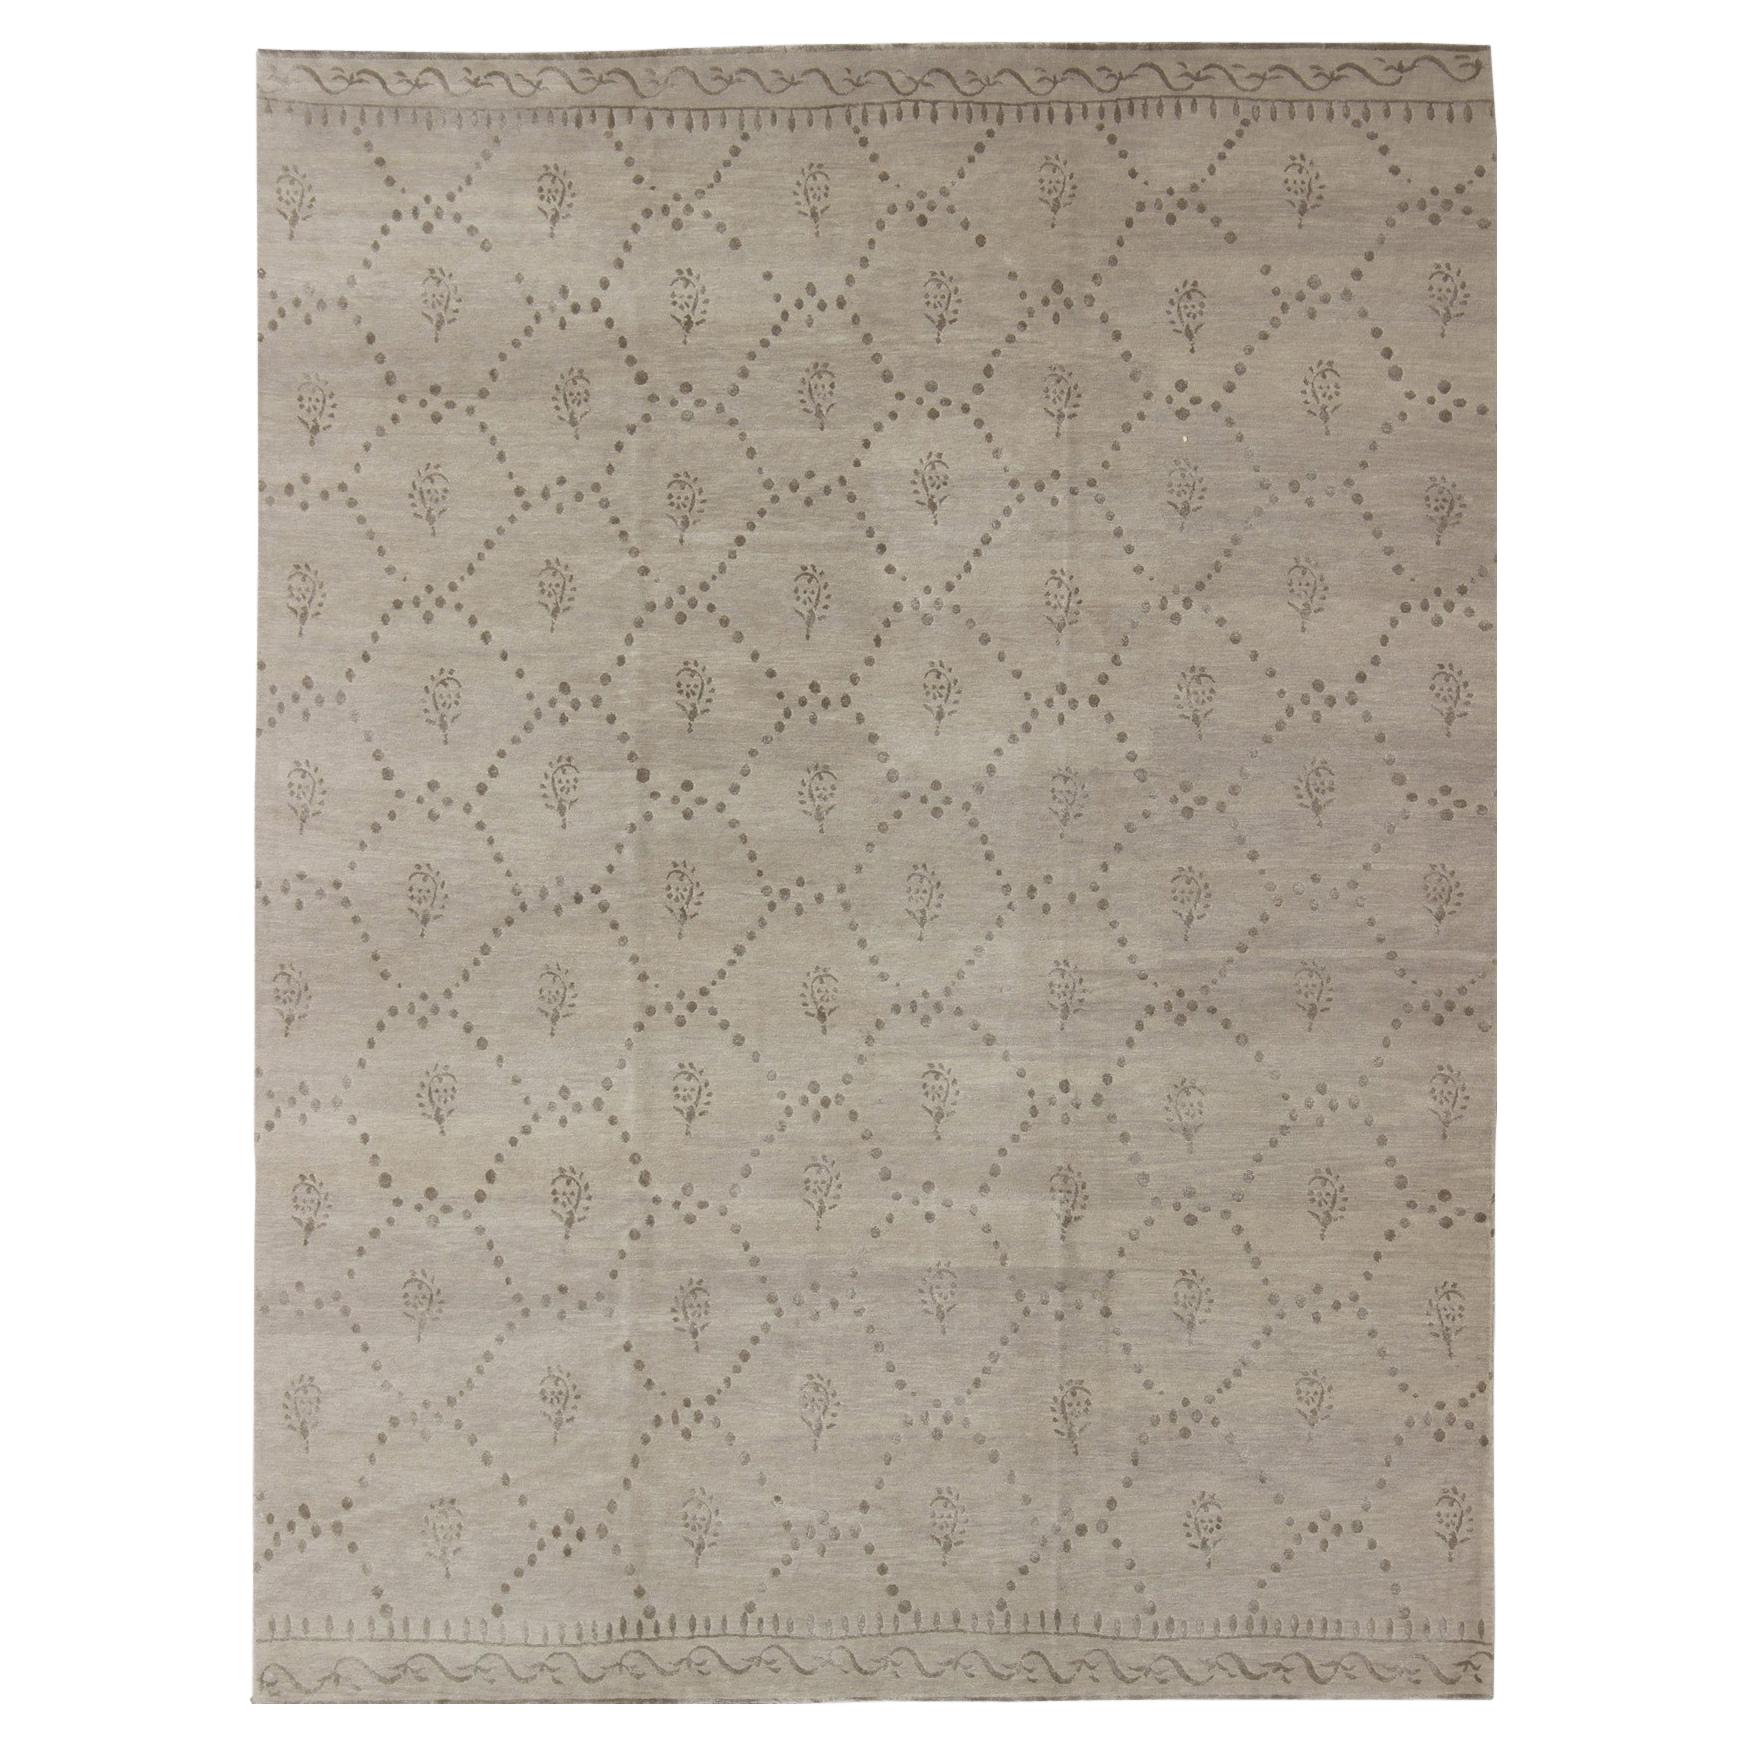 Wool and Silk Modern Tibetan Rug from Nepal in Neutrals and Earth Tones